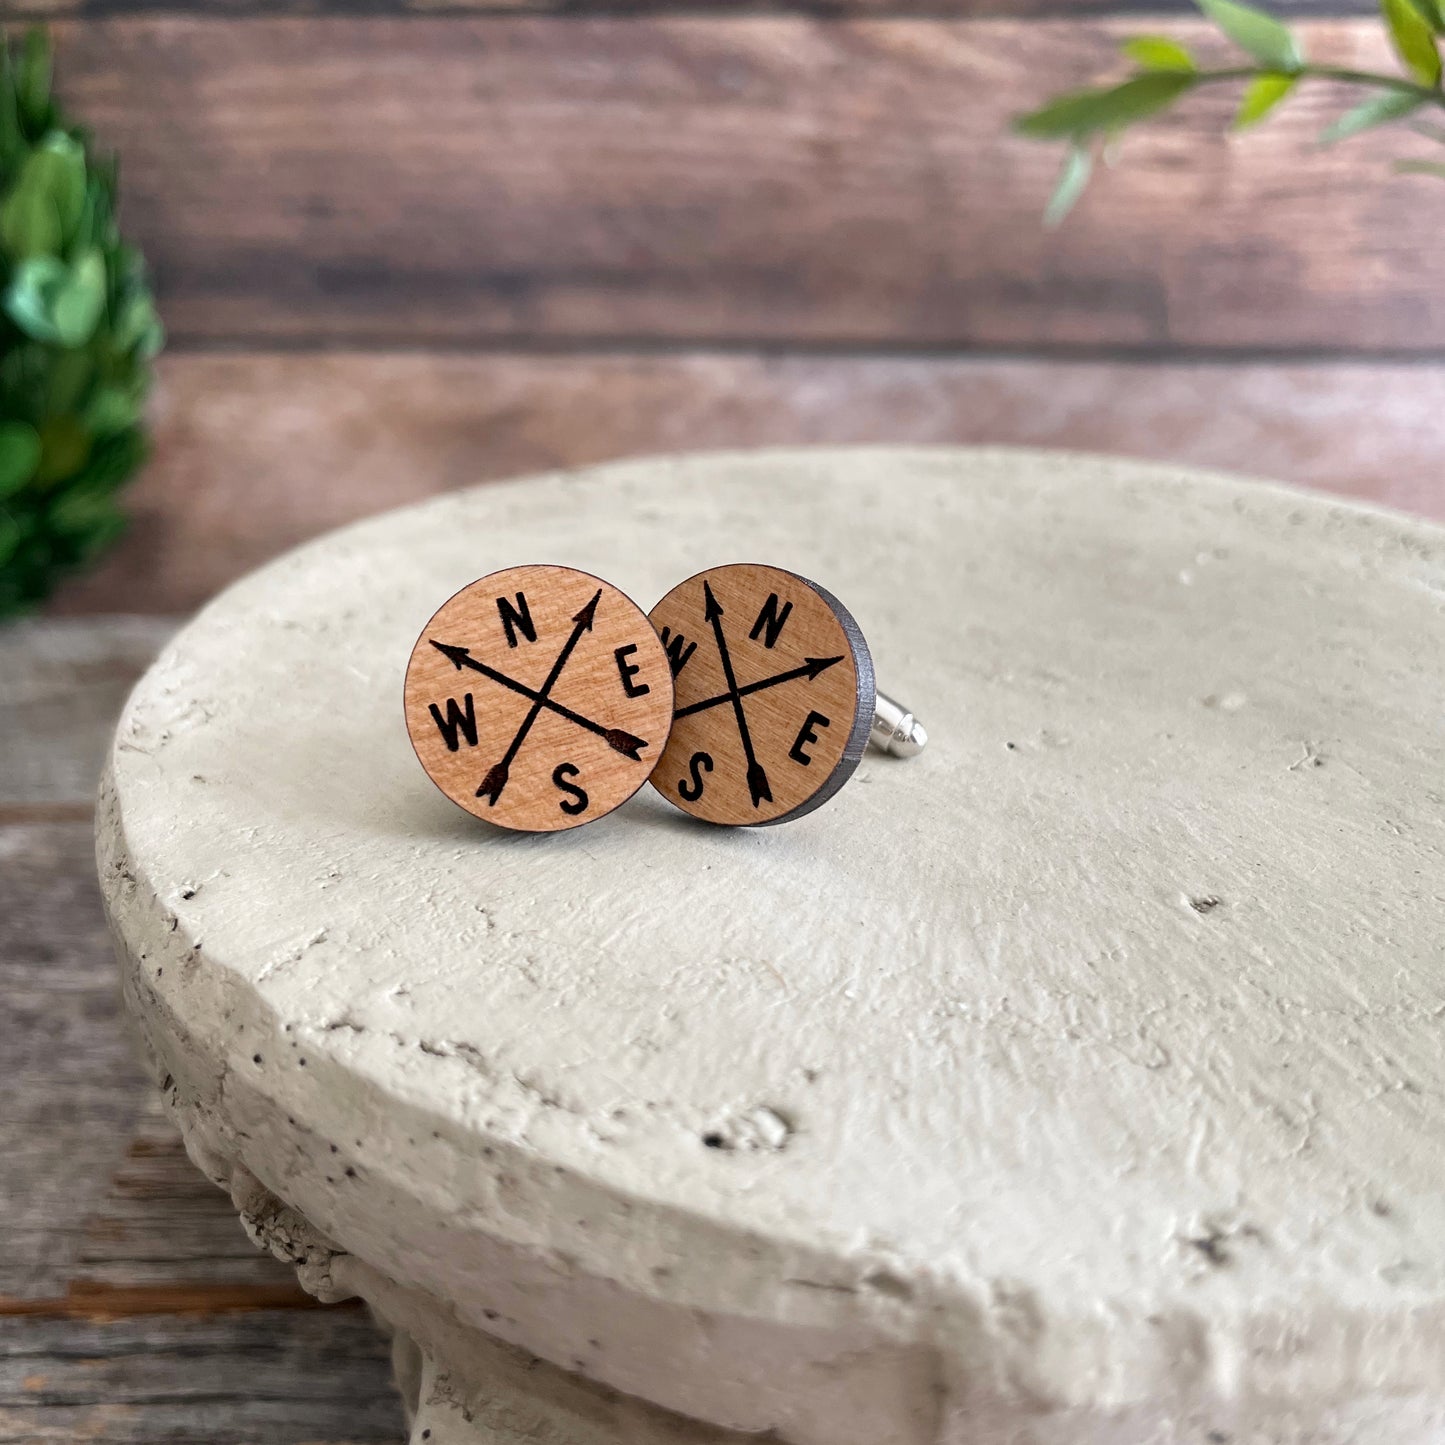 Laser engraved wooden cufflinks with compass